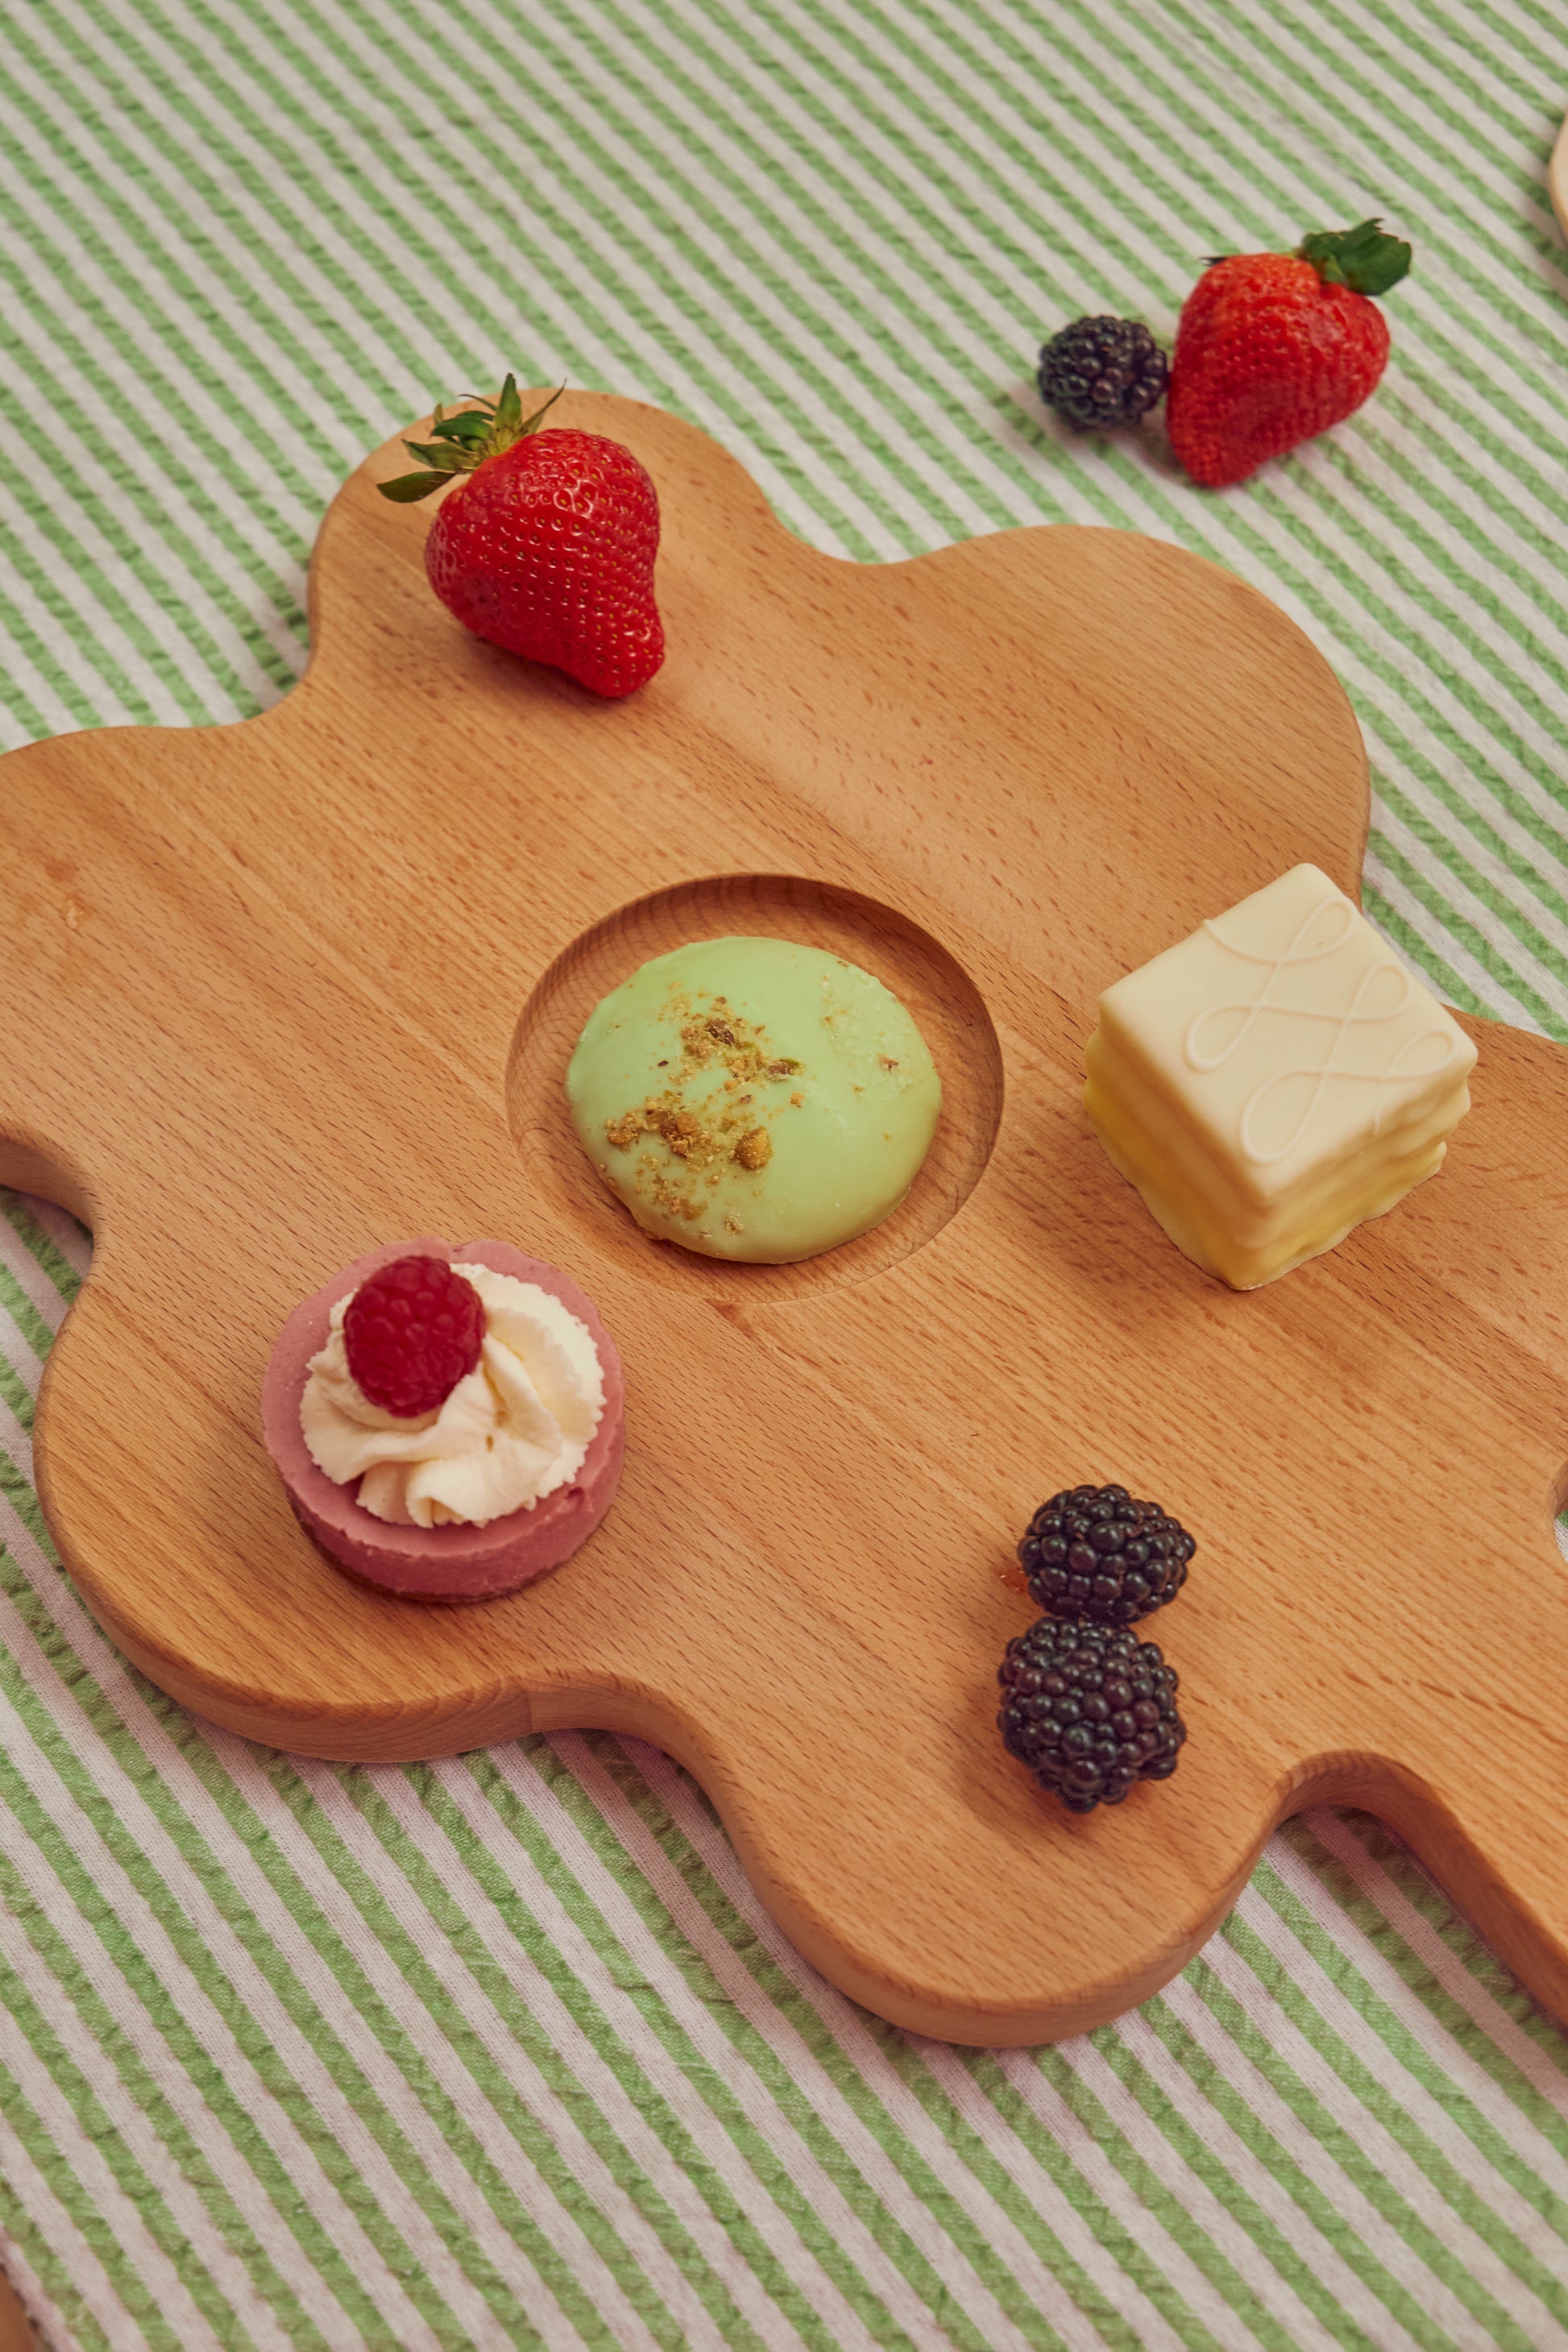 Floral shaped wooden cutting board with fruits and pastries on it 